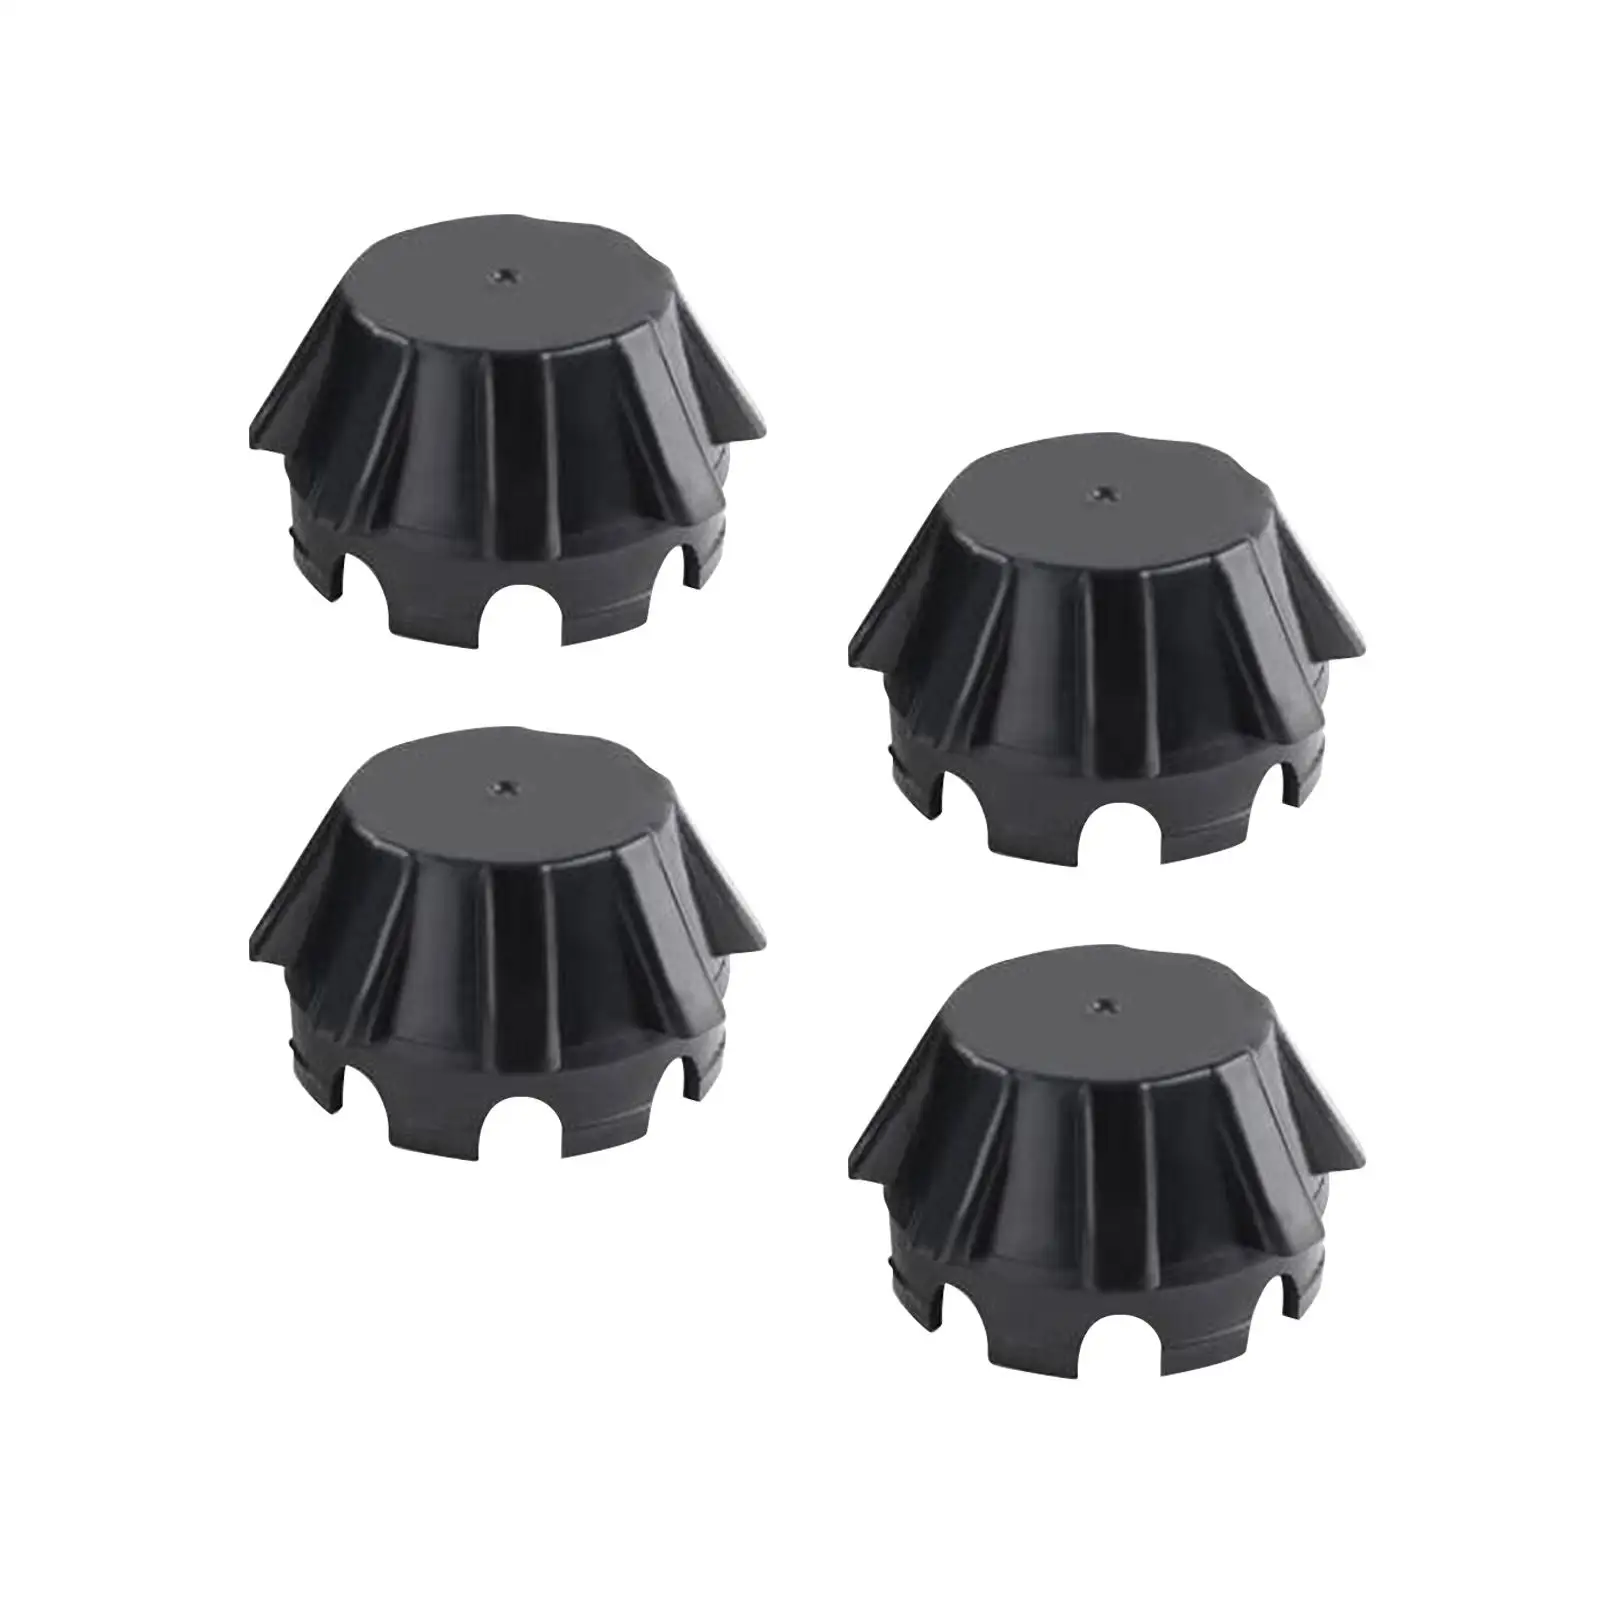 4 Pieces Tire Wheel Hub Caps 11065-1341 Repair Parts Easy Installation Assembly Replace for Kawasaki Teryx Krx 1000